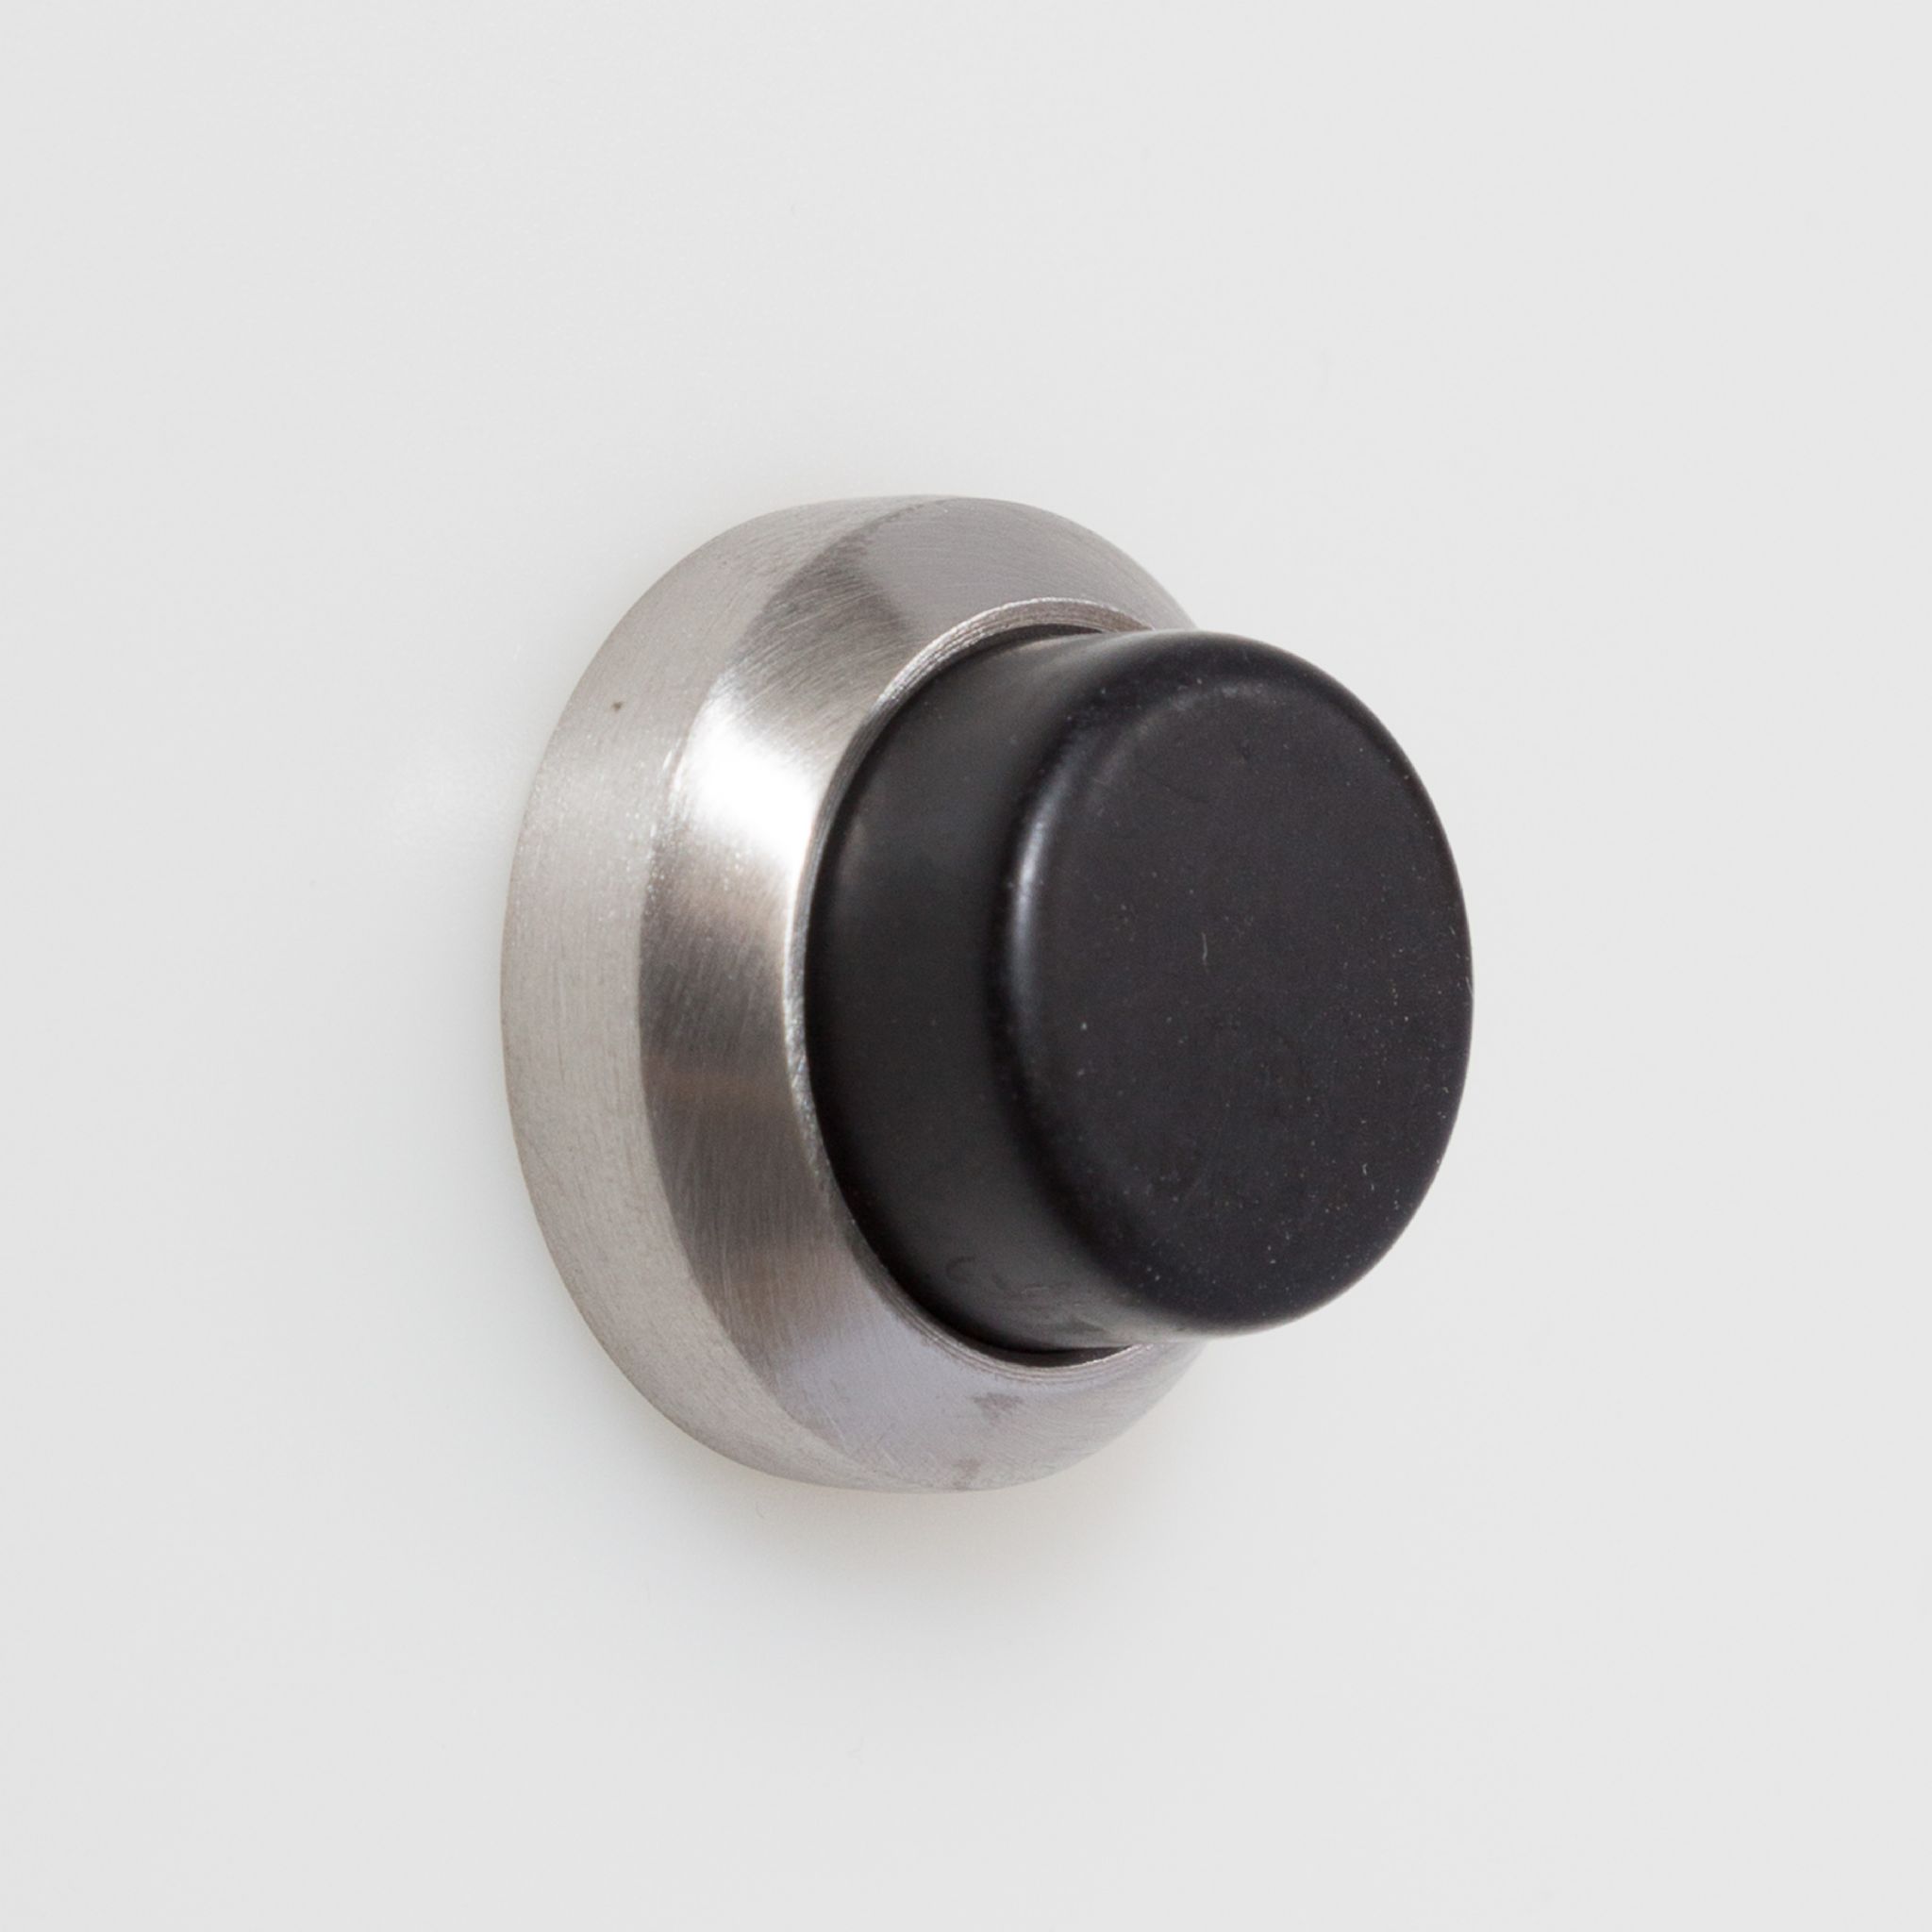 Stainless Steel Door Stops Wall Mounted & Fittings, Door Stopper With  Rubber Buffer, Screw Fixing (c-1)